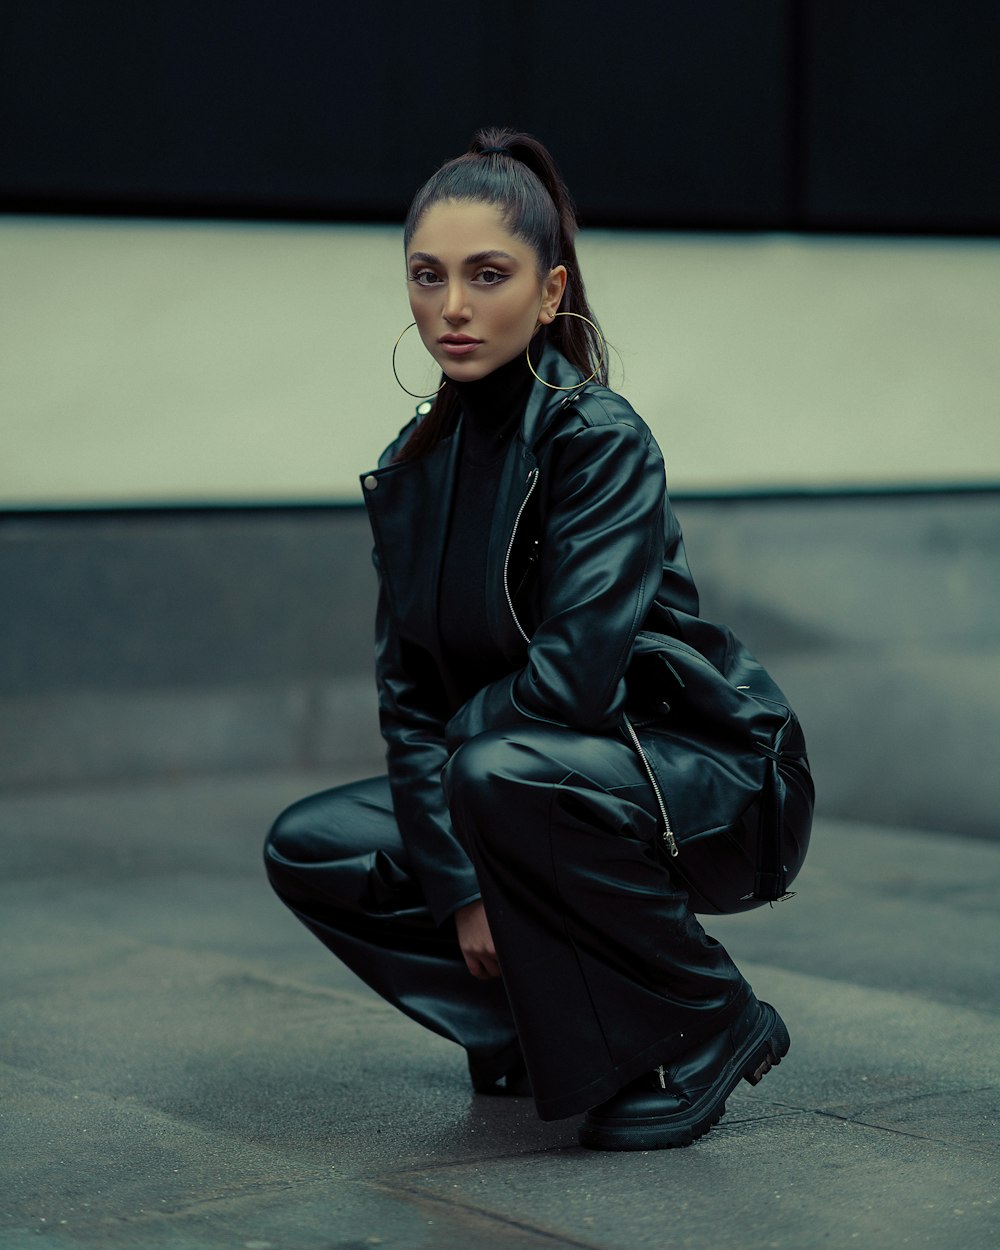 a woman in a black leather outfit crouches on the ground